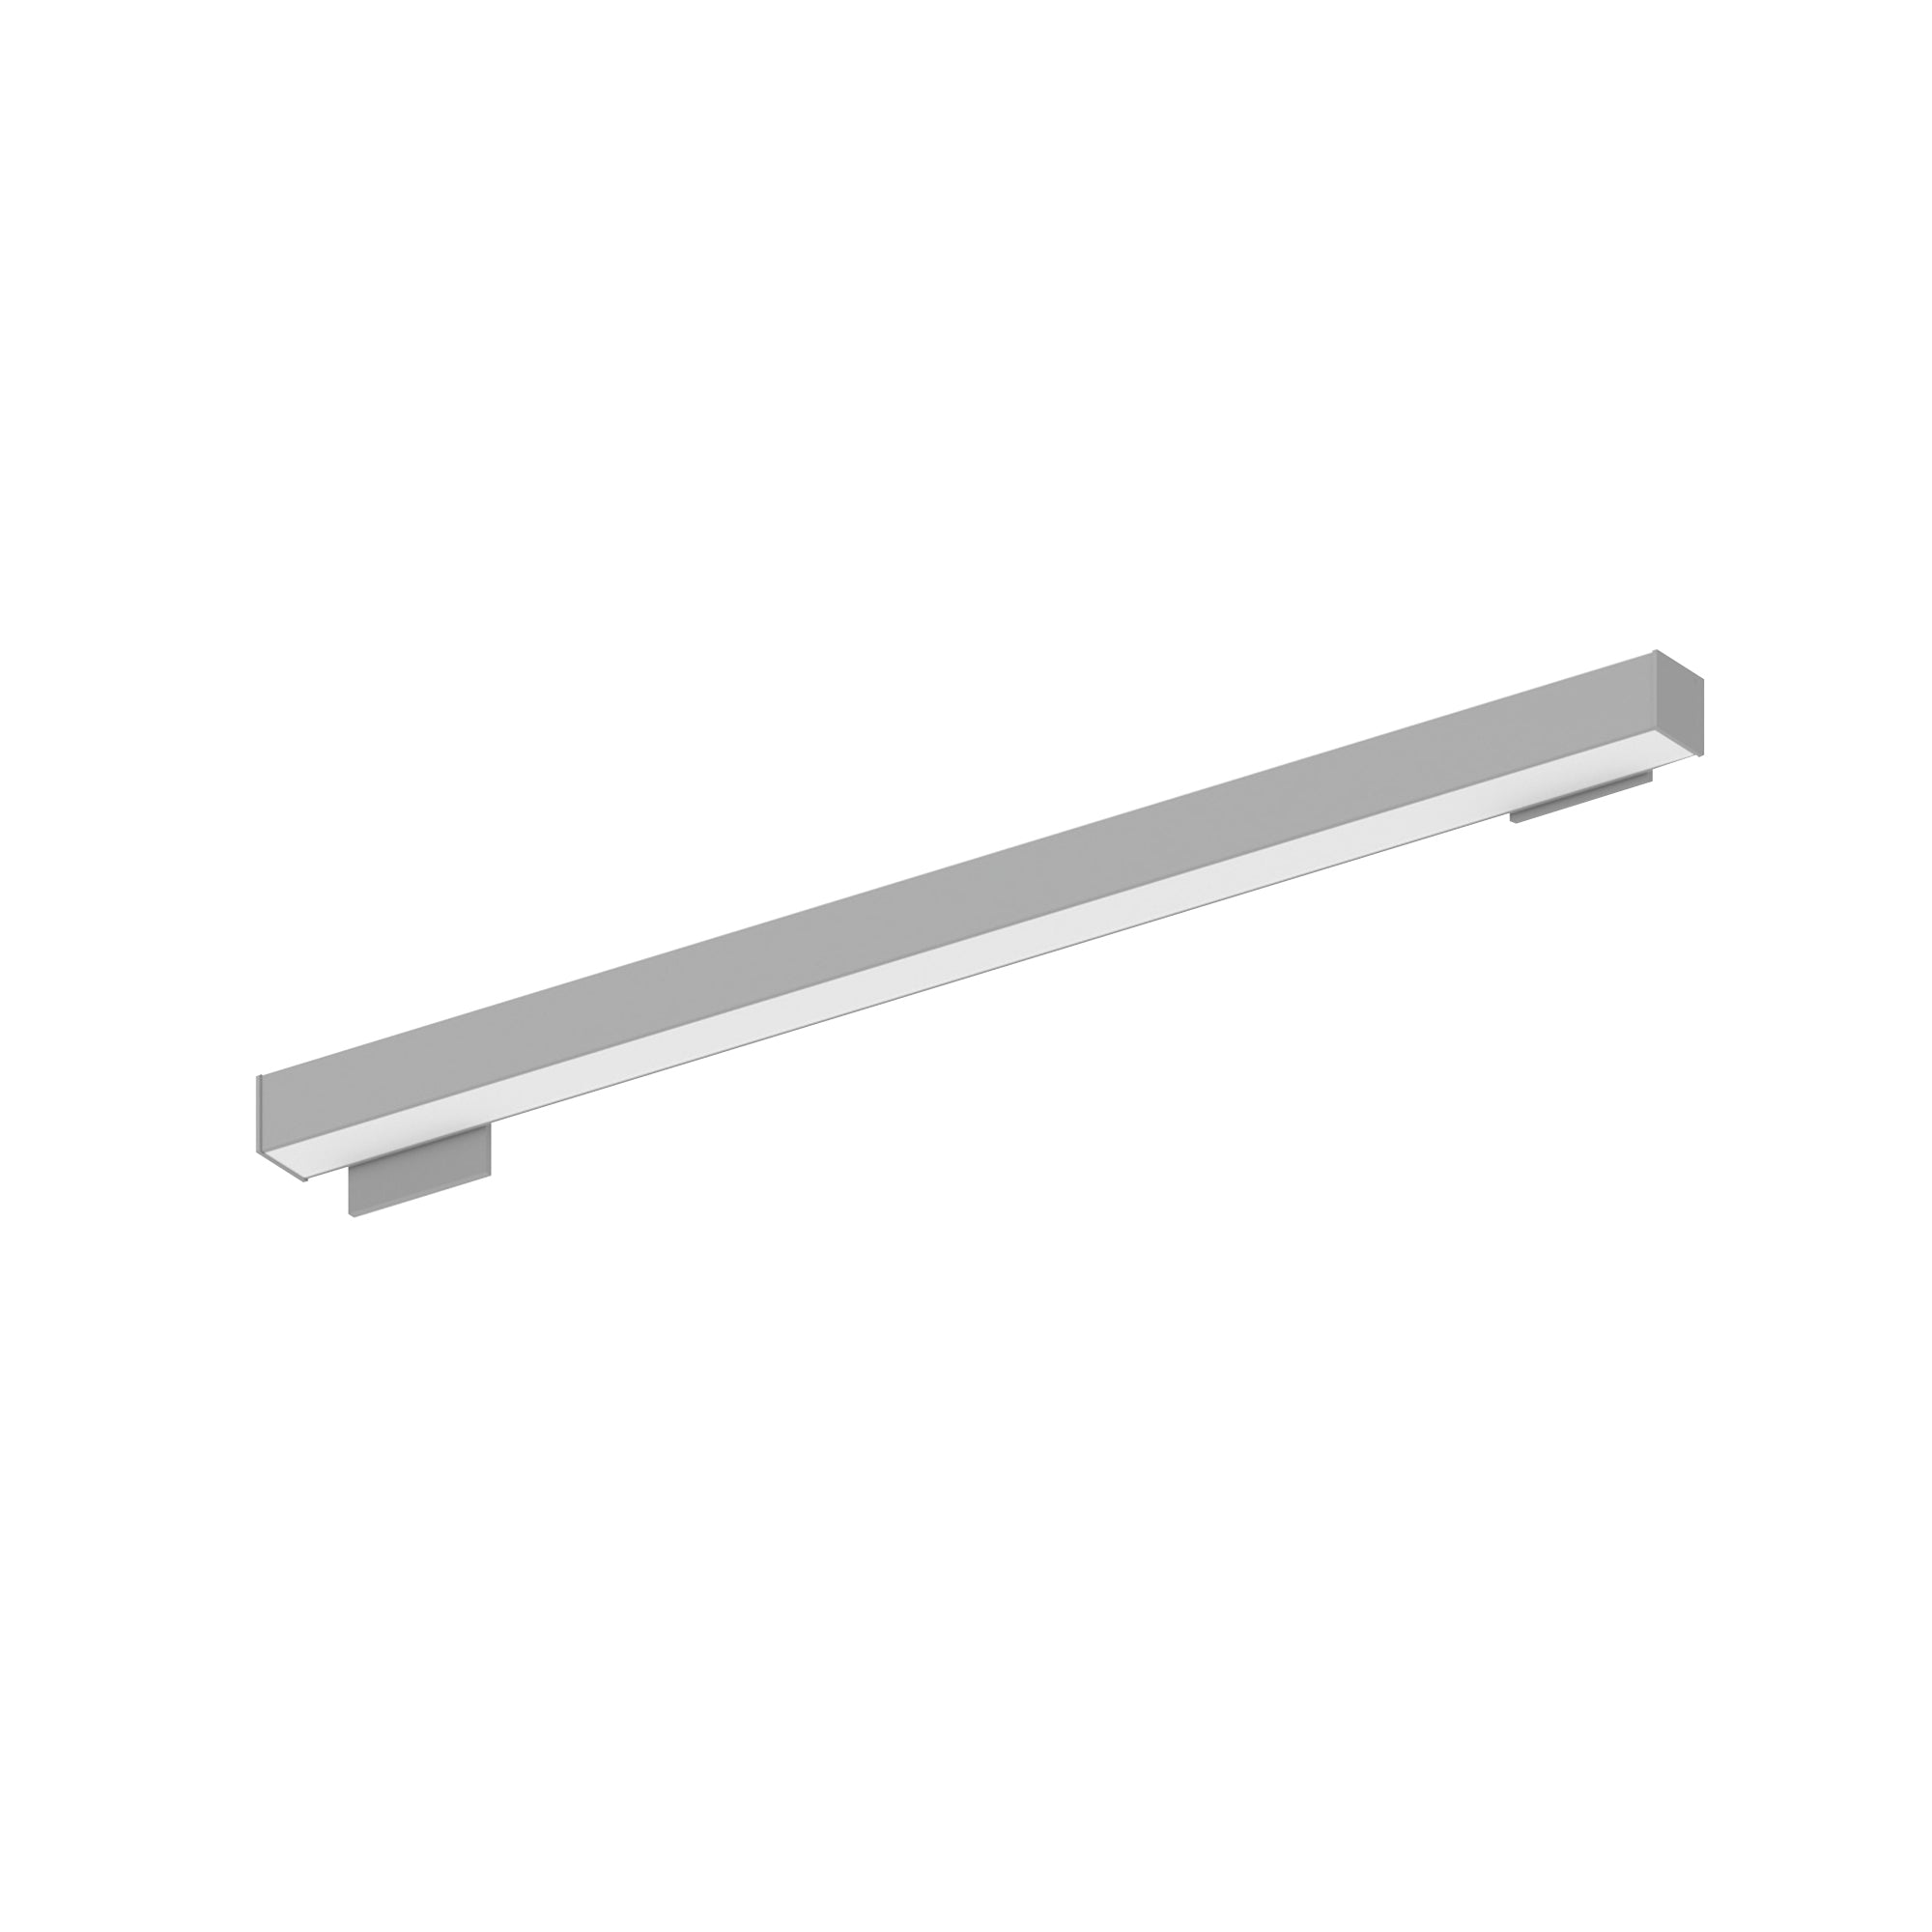 Nora Lighting NWLIN-41040A/L4-R2P - Linear - 4' L-Line LED Wall Mount Linear, 4200lm / 4000K, 4 Inchx4 Inch Left Plate & 2 Inchx4 Inch Right Plate, Right Power Feed, Aluminum Finish